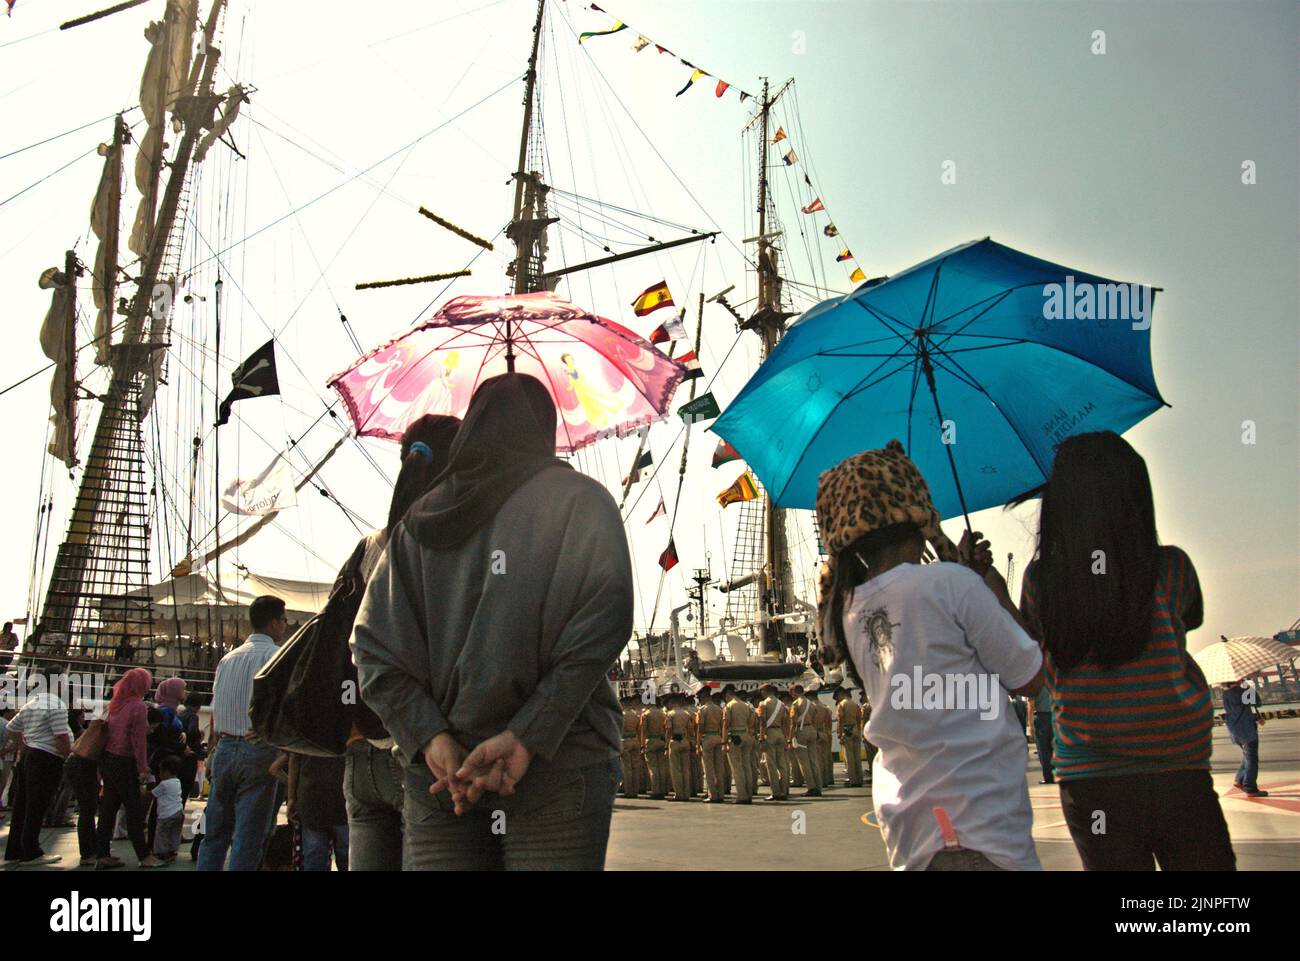 Visitors paying attention to Indonesian navy cadets who are lining up for a ceremony, in a background of KRI Dewaruci (Dewa Ruci), an Indonesian tall ship, that is being opened for public visitors at Kolinlamil harbour (Navy harbour) in Tanjung Priok, North Jakarta, Jakarta, Indonesia. Stock Photo